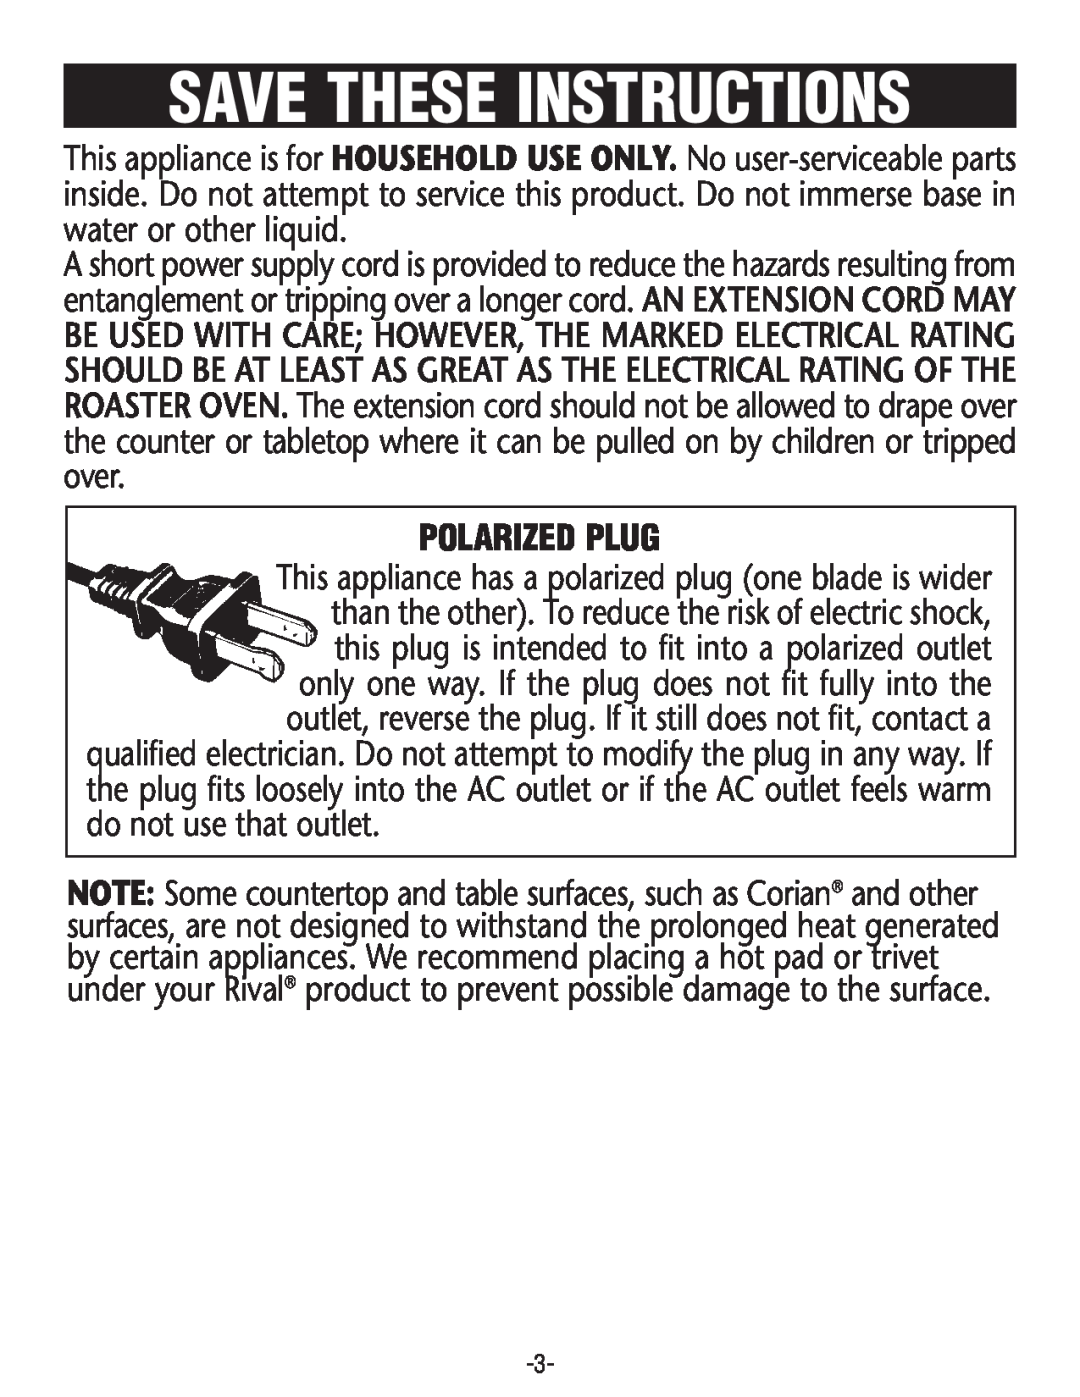 Rival R0180BR-C, R0188BR manual Save These Instructions, Polarized Plug 